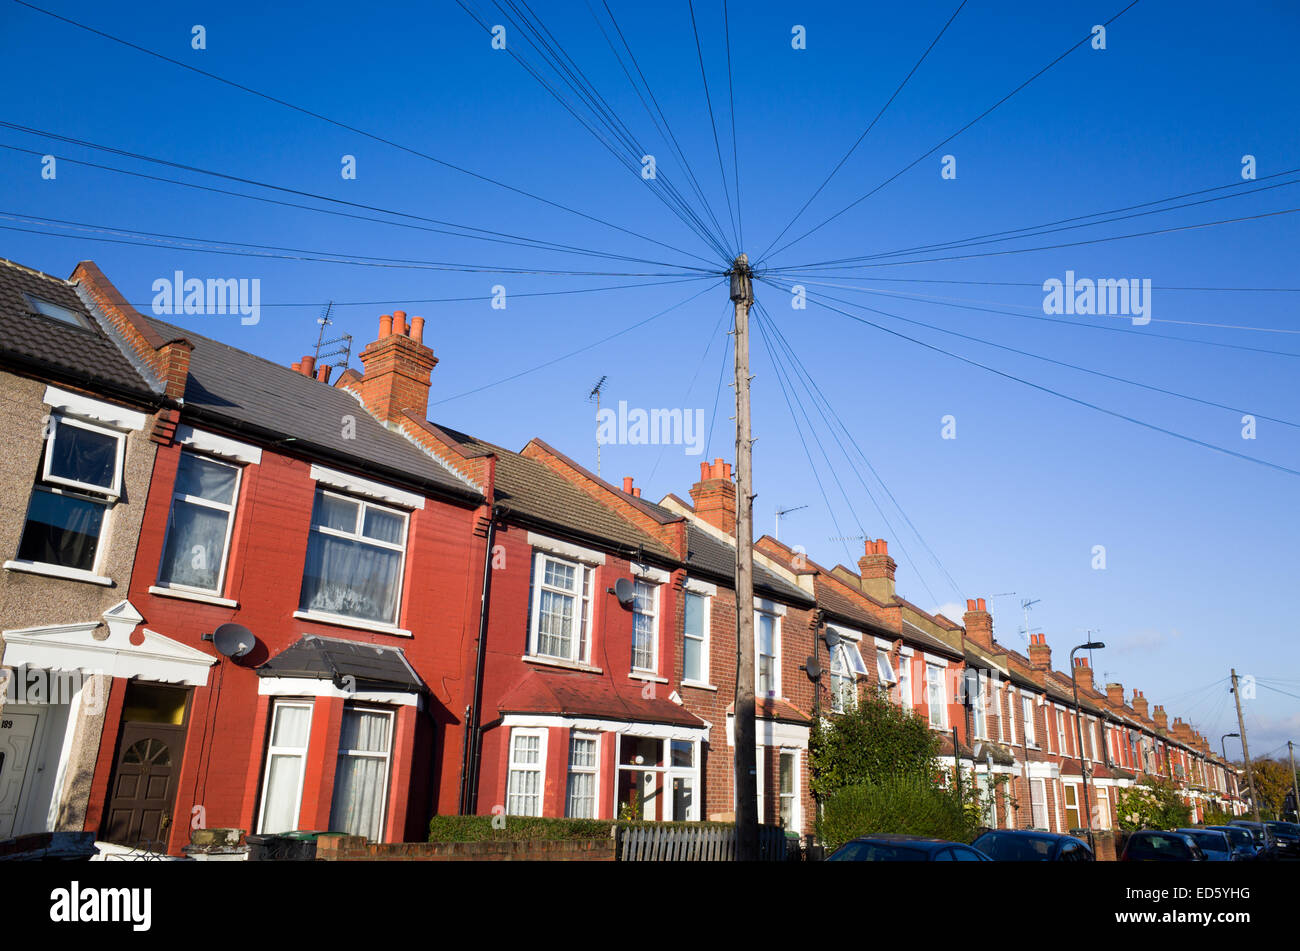 Telephone communication mast with wires running to the terraced houses in residential street, Haringey, London, England, UK Stock Photo